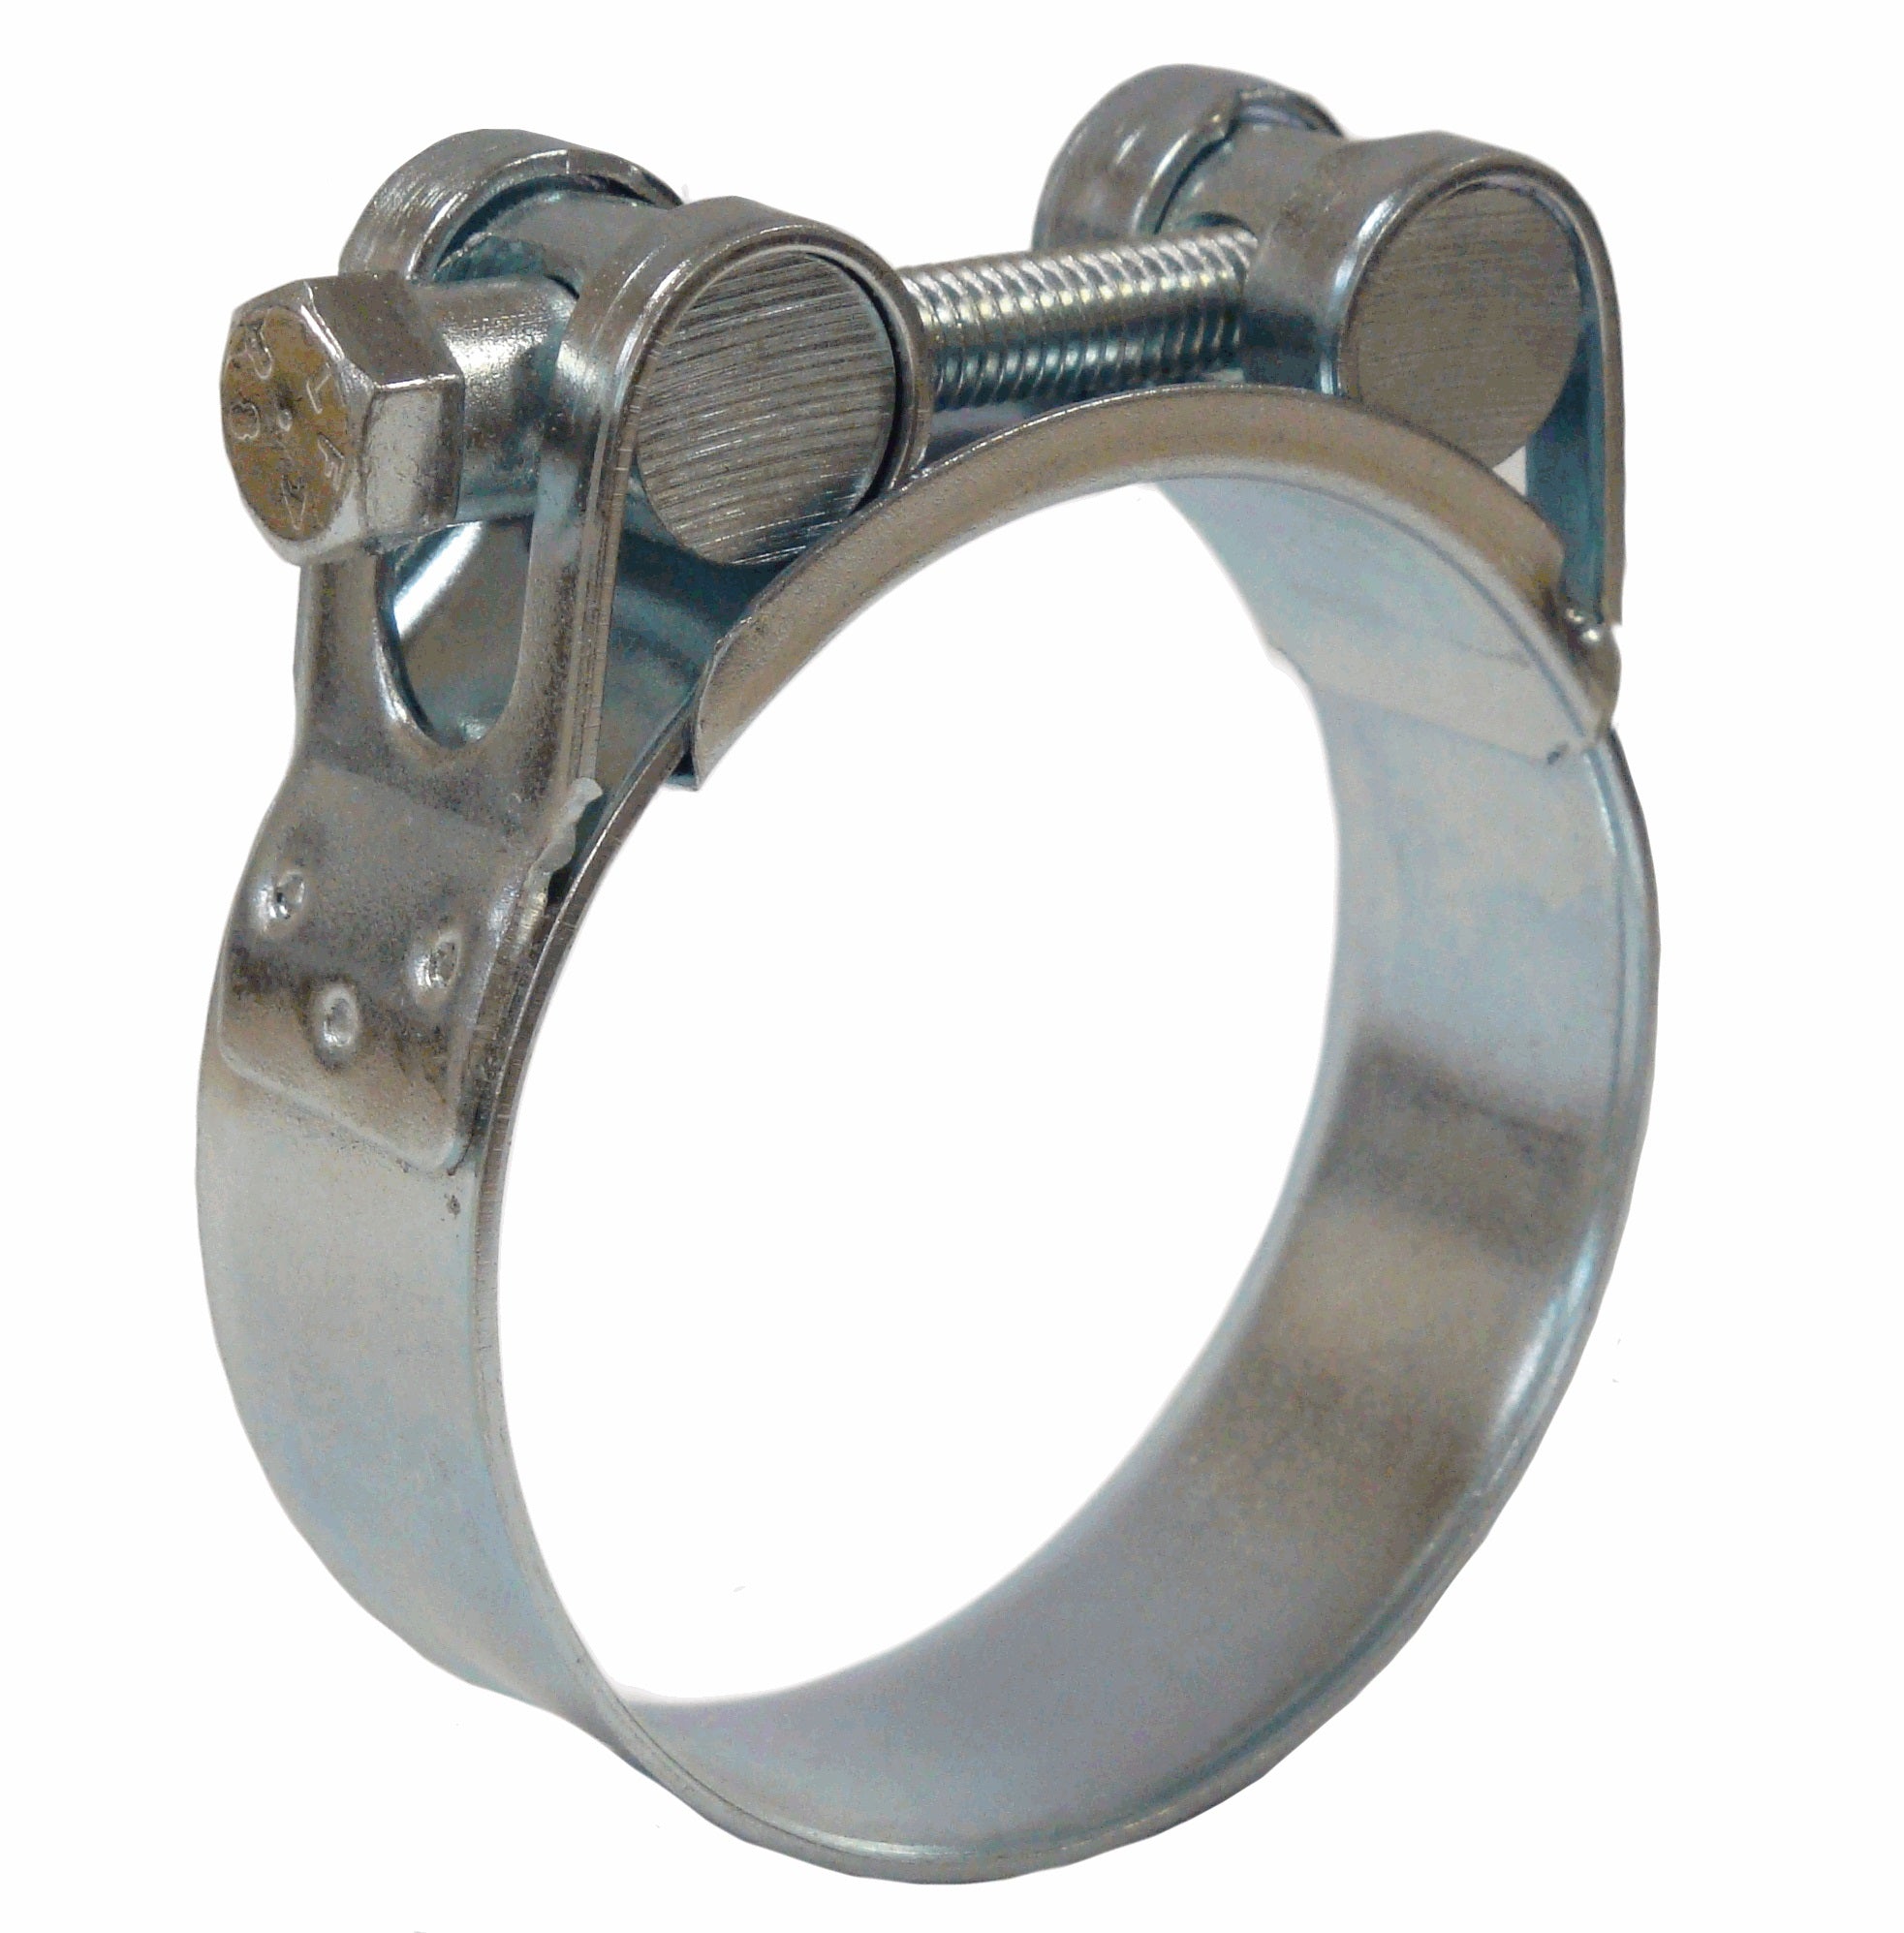 Jubilee® Superclamp 64-67mm 316 Stainless Steel